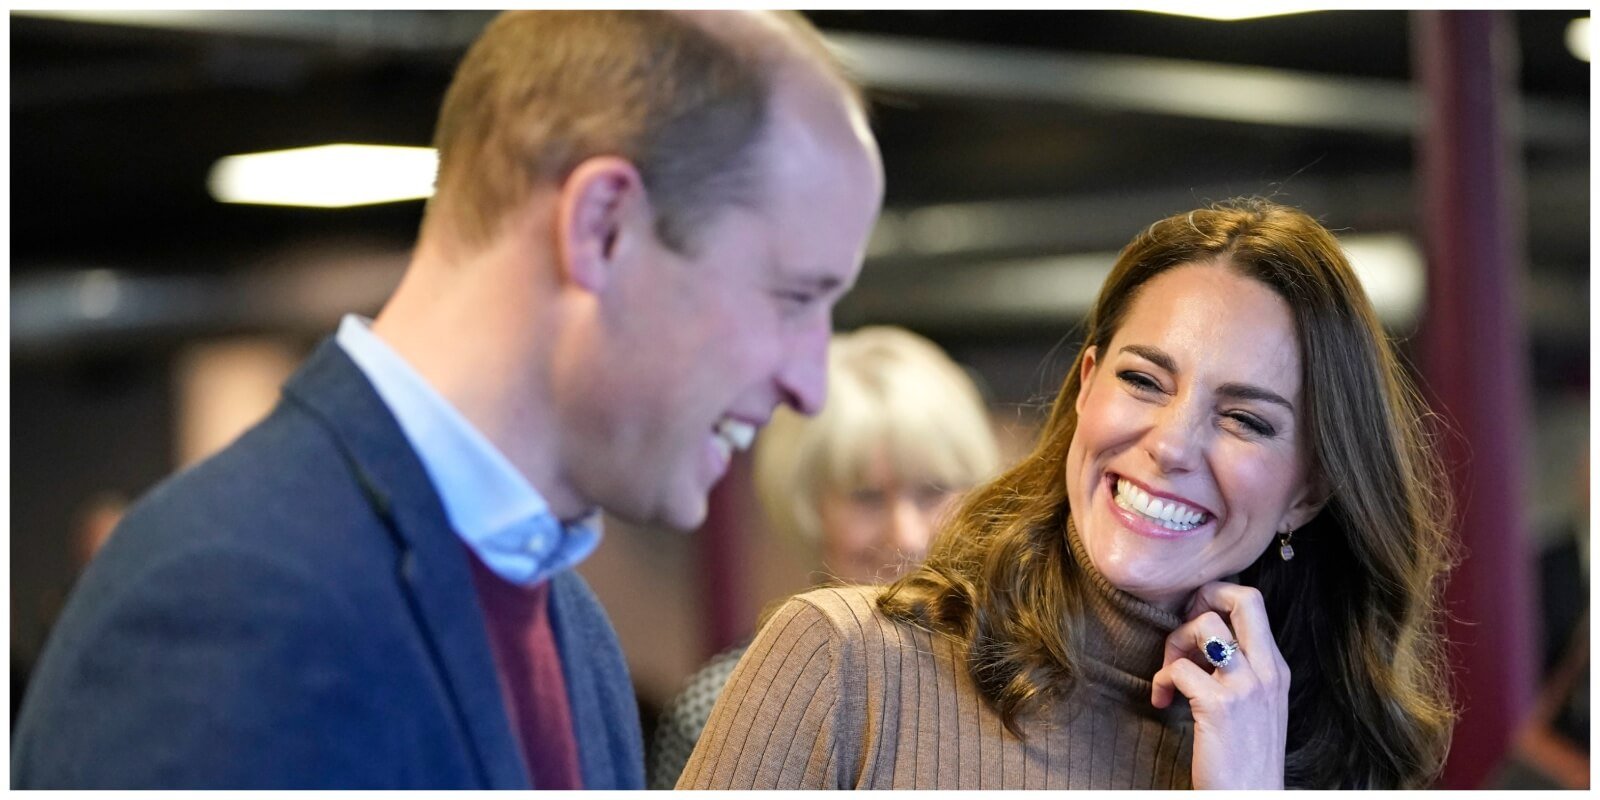 Prince William and Kate Middleton smile at a visit to the Church on the Street on on January 20th, 2022 in Burnley, England.